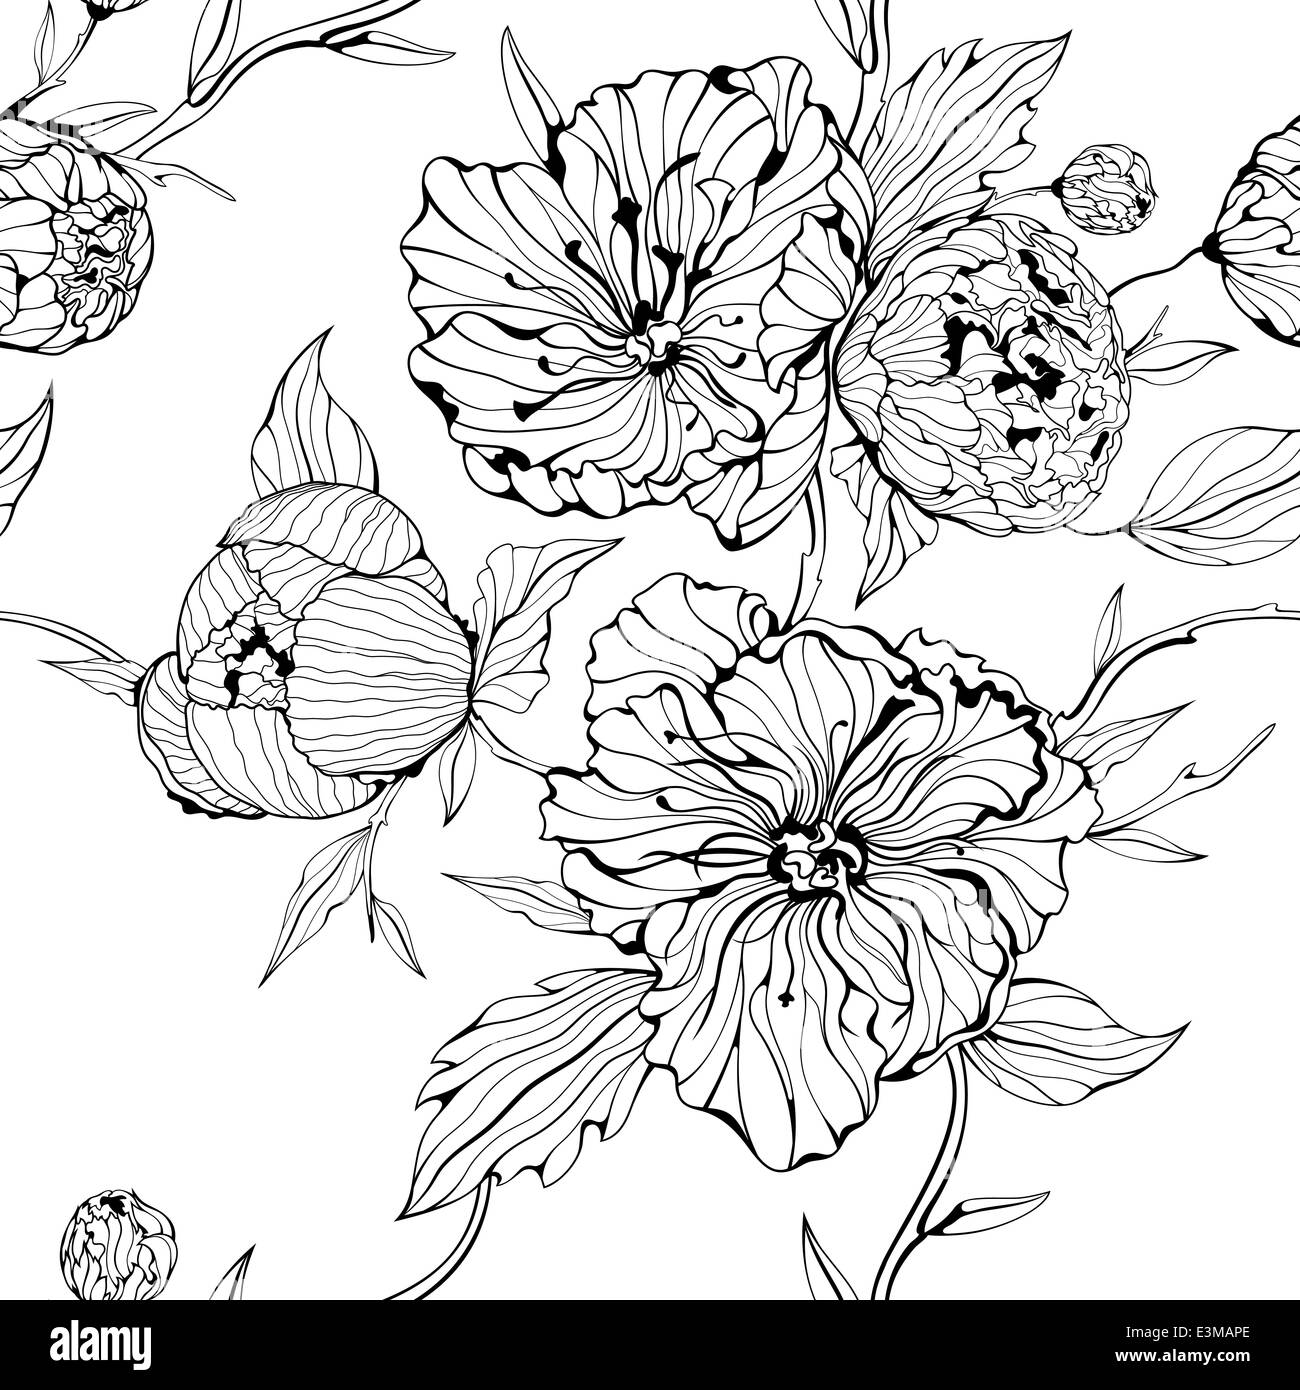 Black and white seamless background with flowers Stock Photo